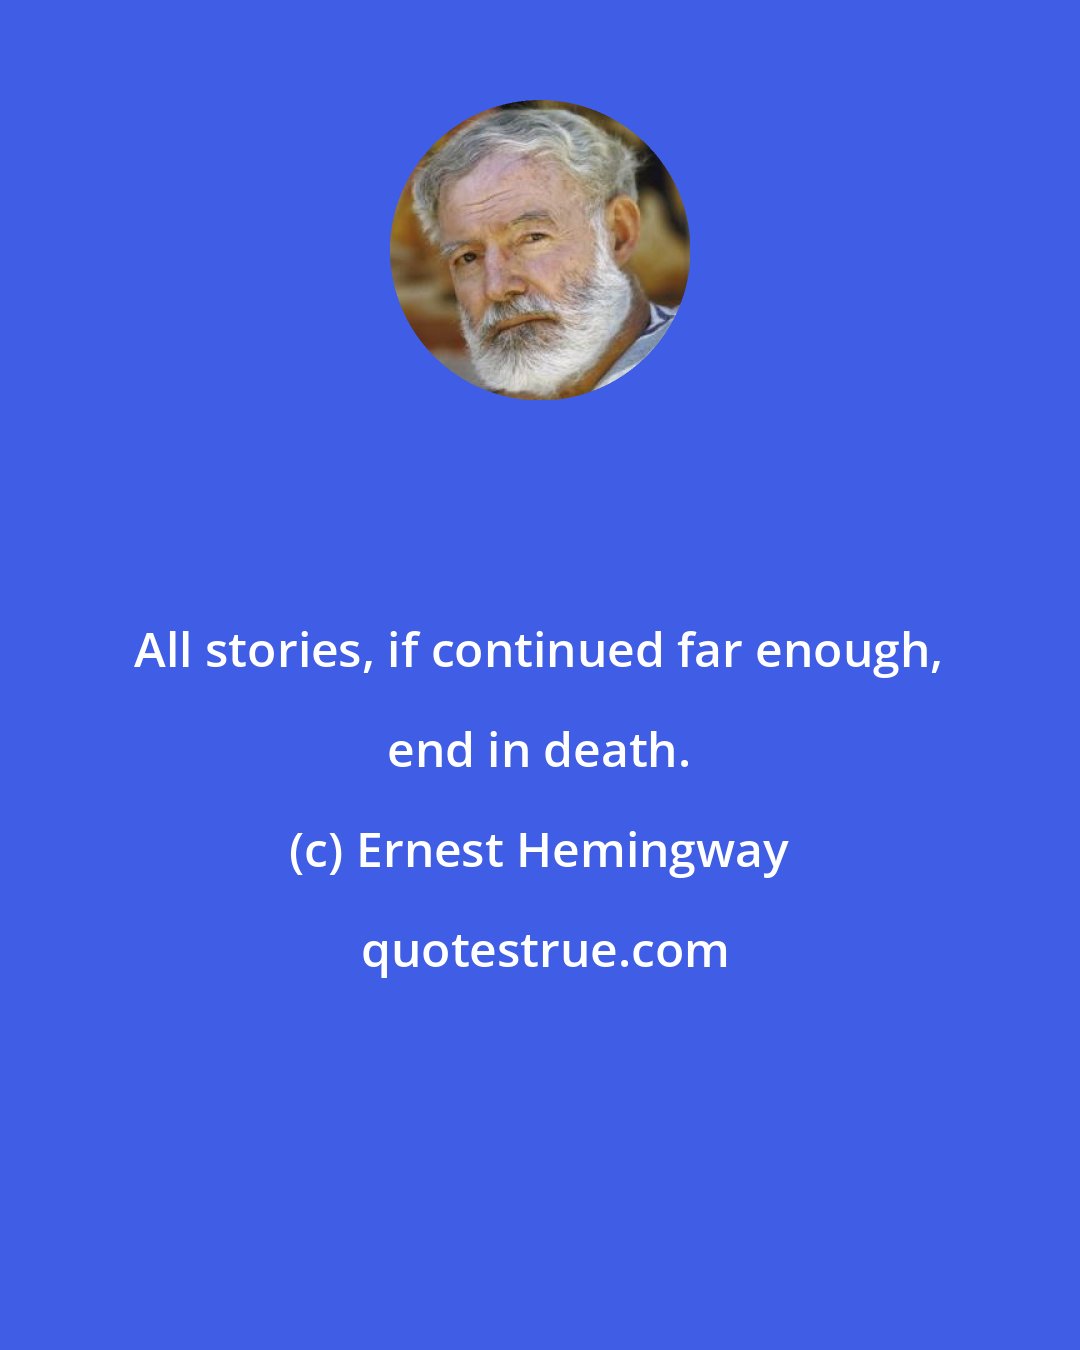 Ernest Hemingway: All stories, if continued far enough, end in death.